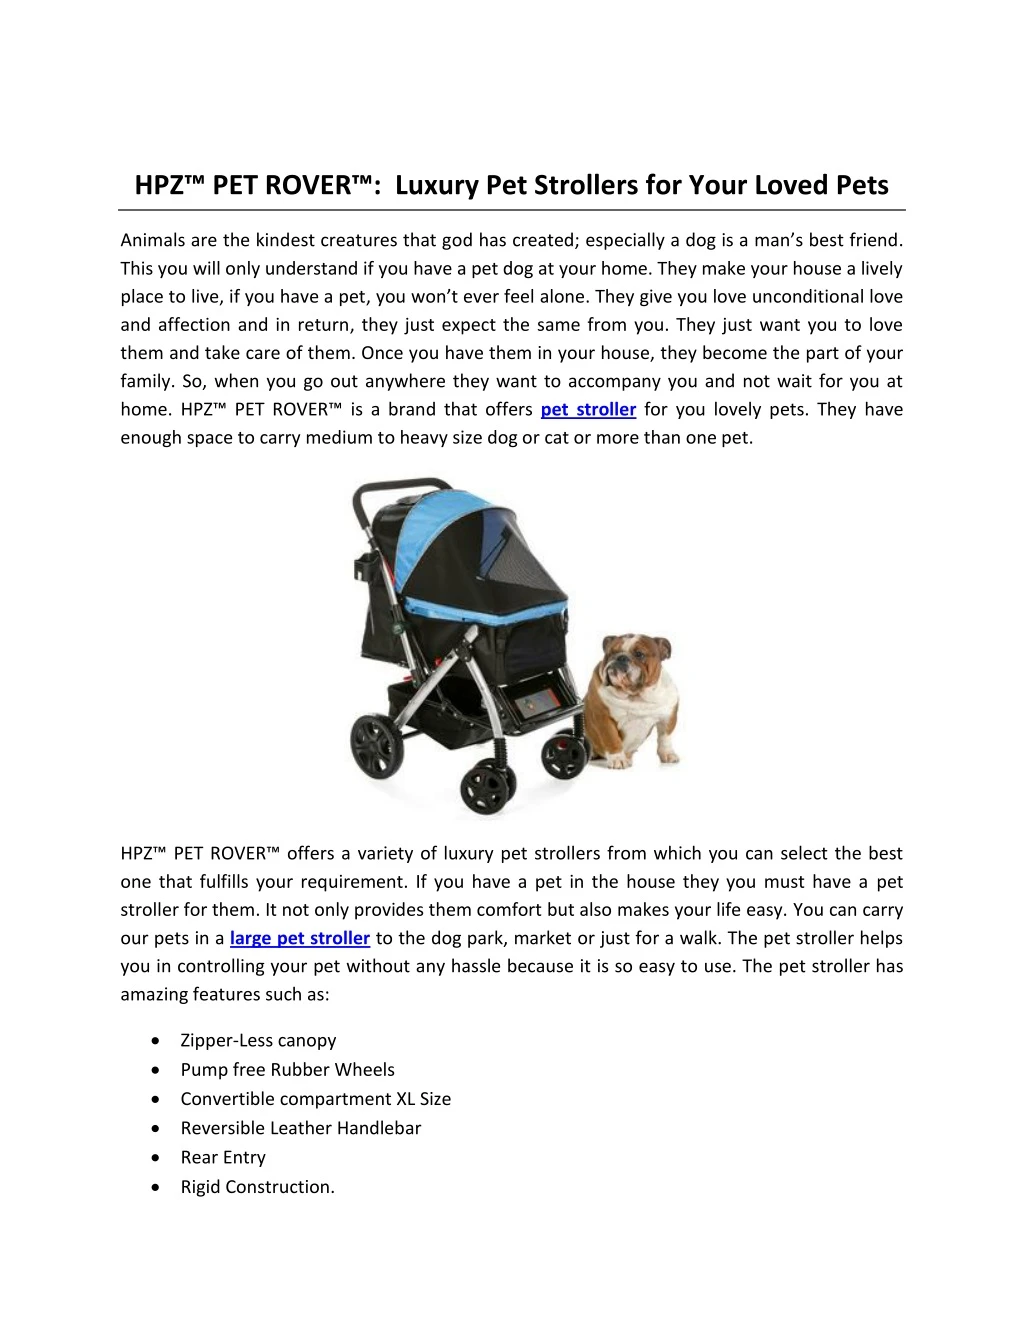 hpz pet rover luxury pet strollers for your loved